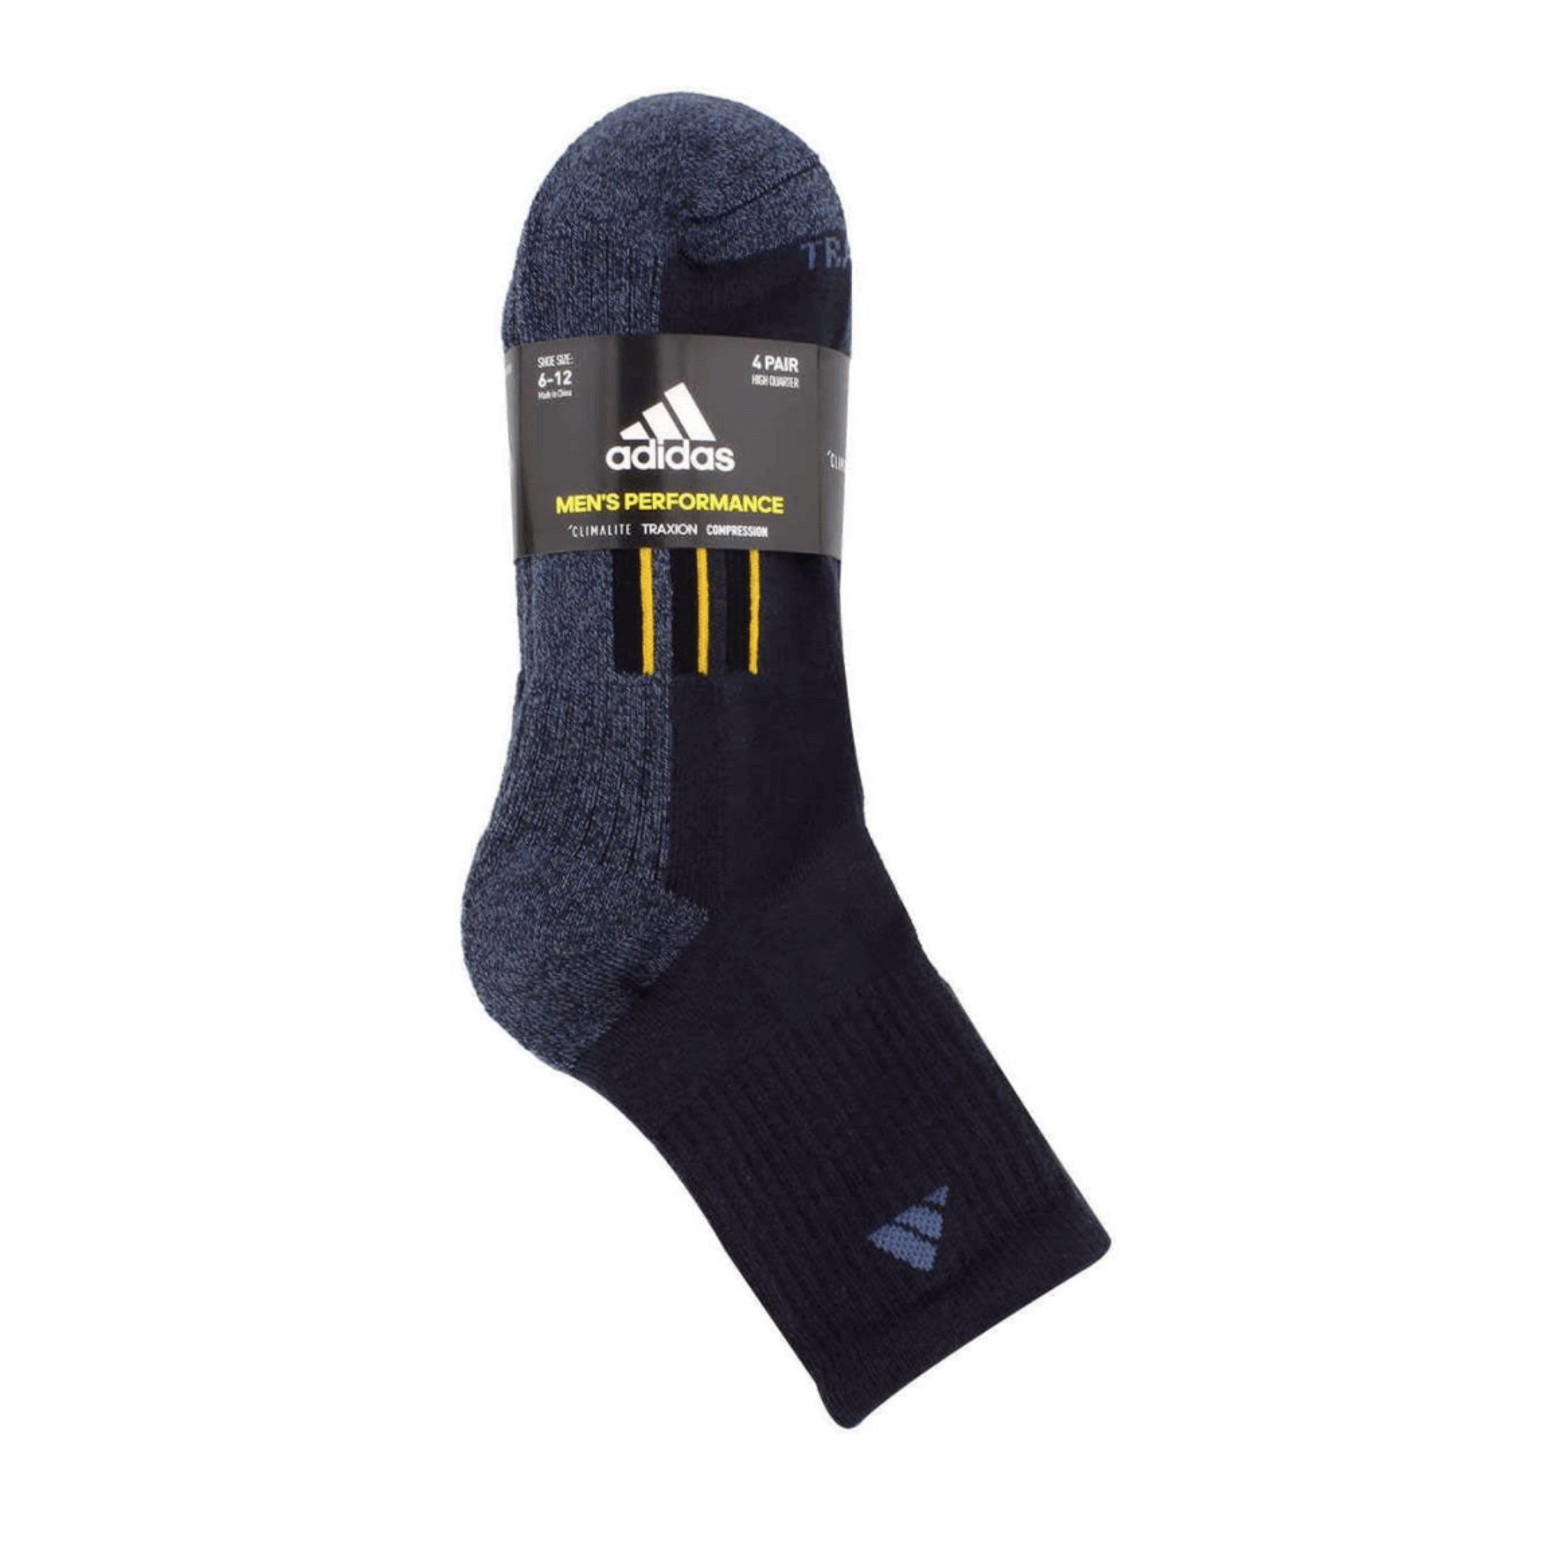 A pack of Adidas Mens Performance Climalite Socks four Pairs in Navy and dark grey.